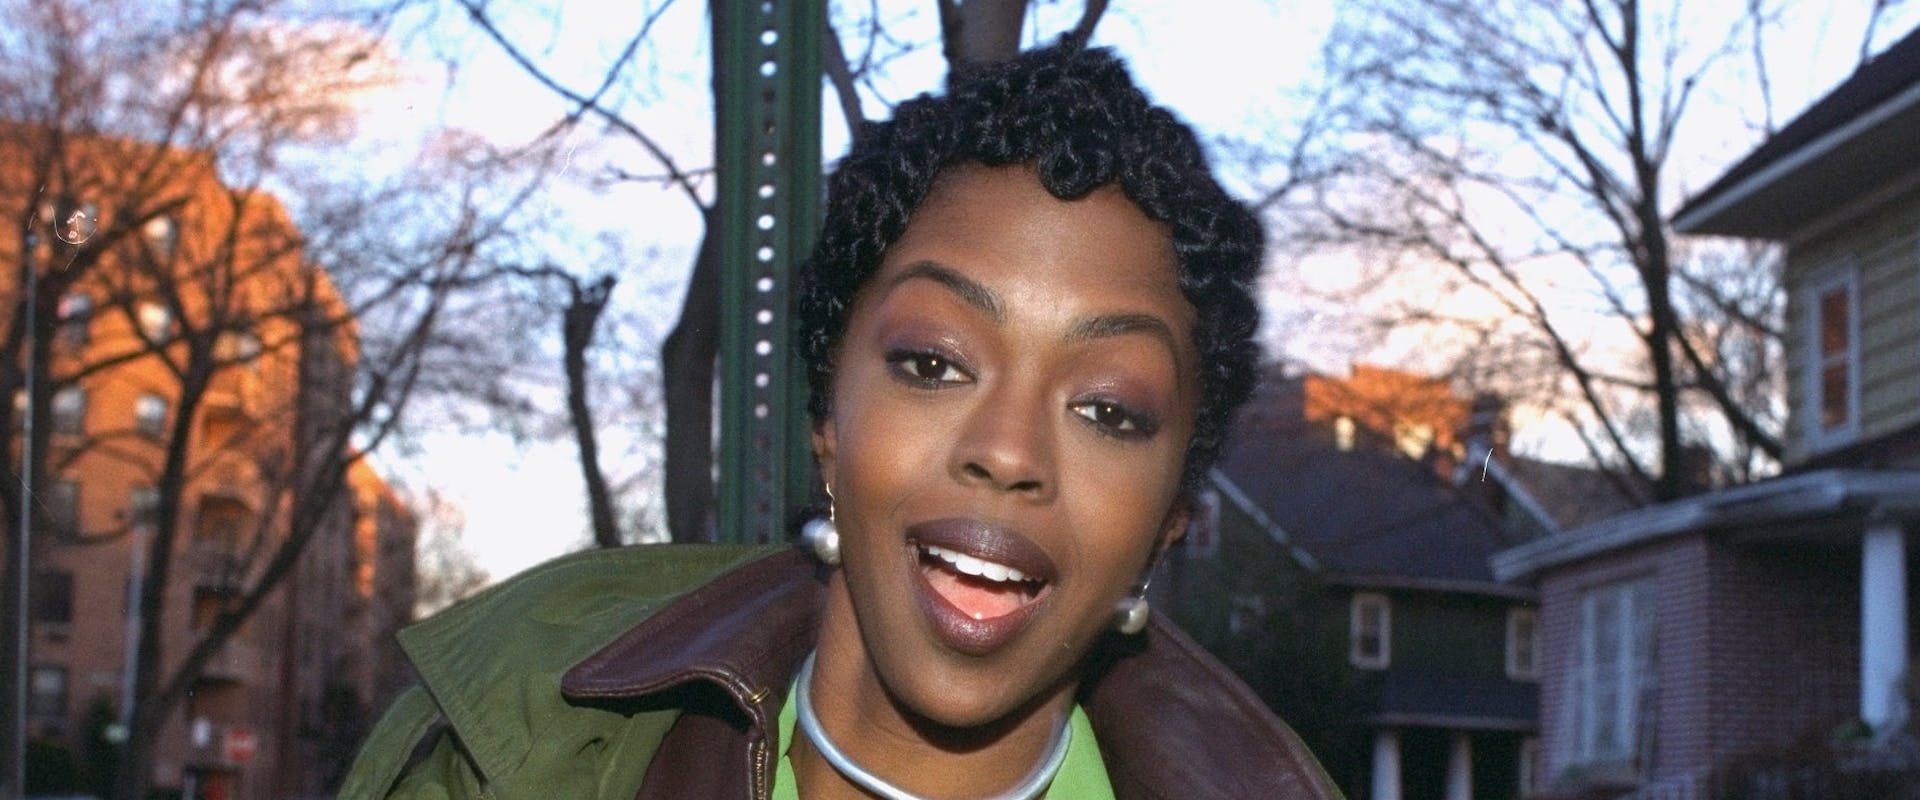 Fugees' lead singer Lauryn Hill during "Killing Me Softly" video shoot.